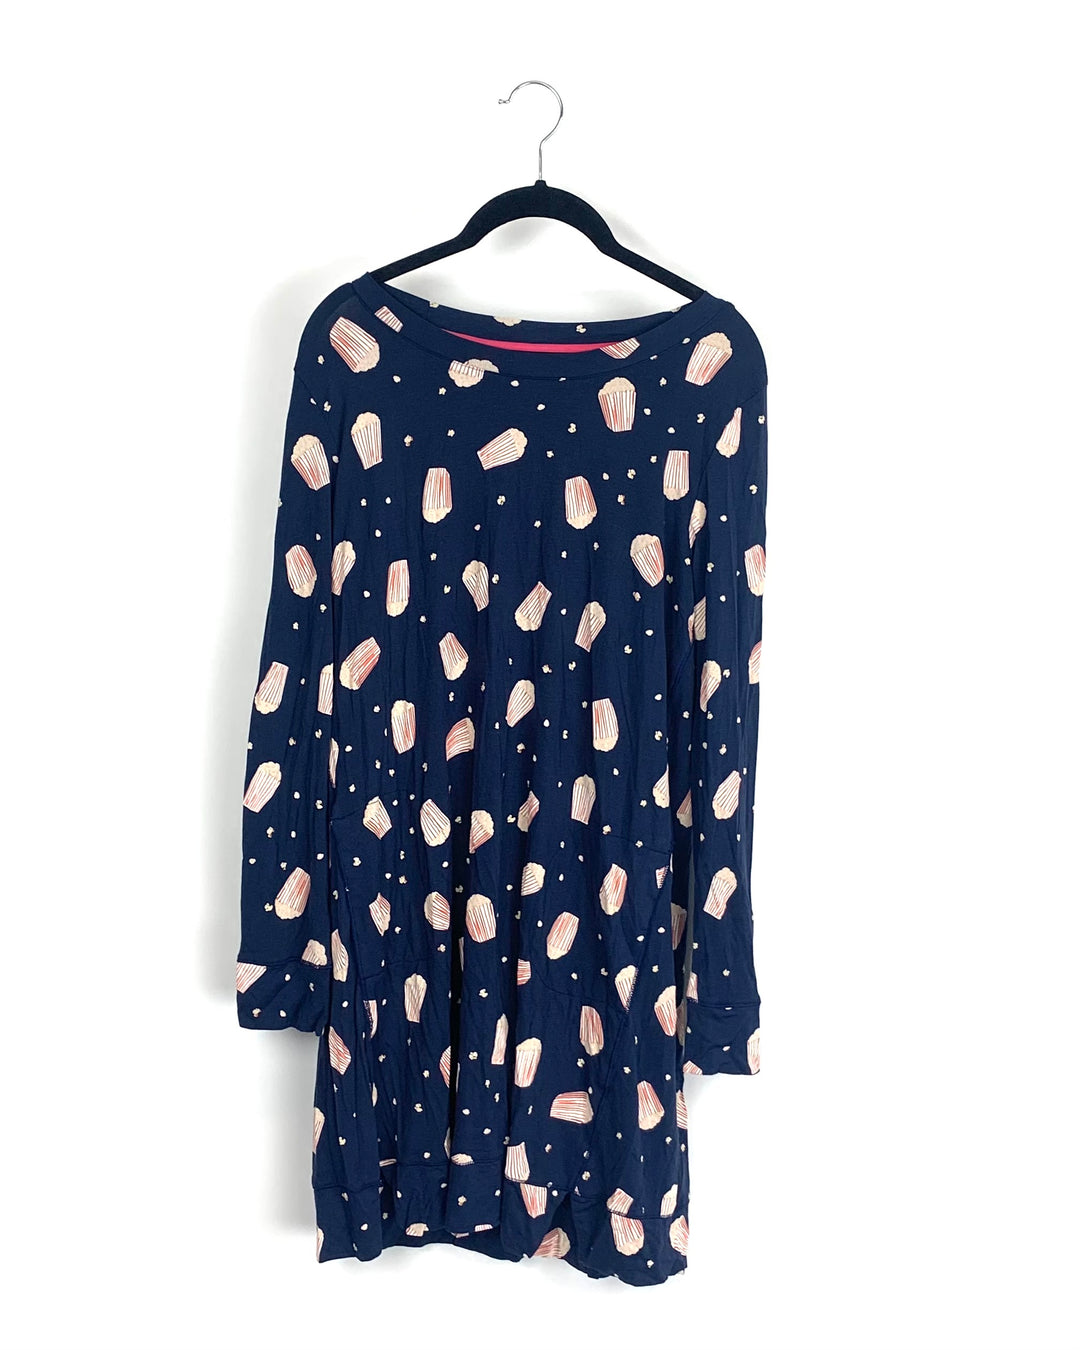 Blue Popcorn Printed Nightgown - Small